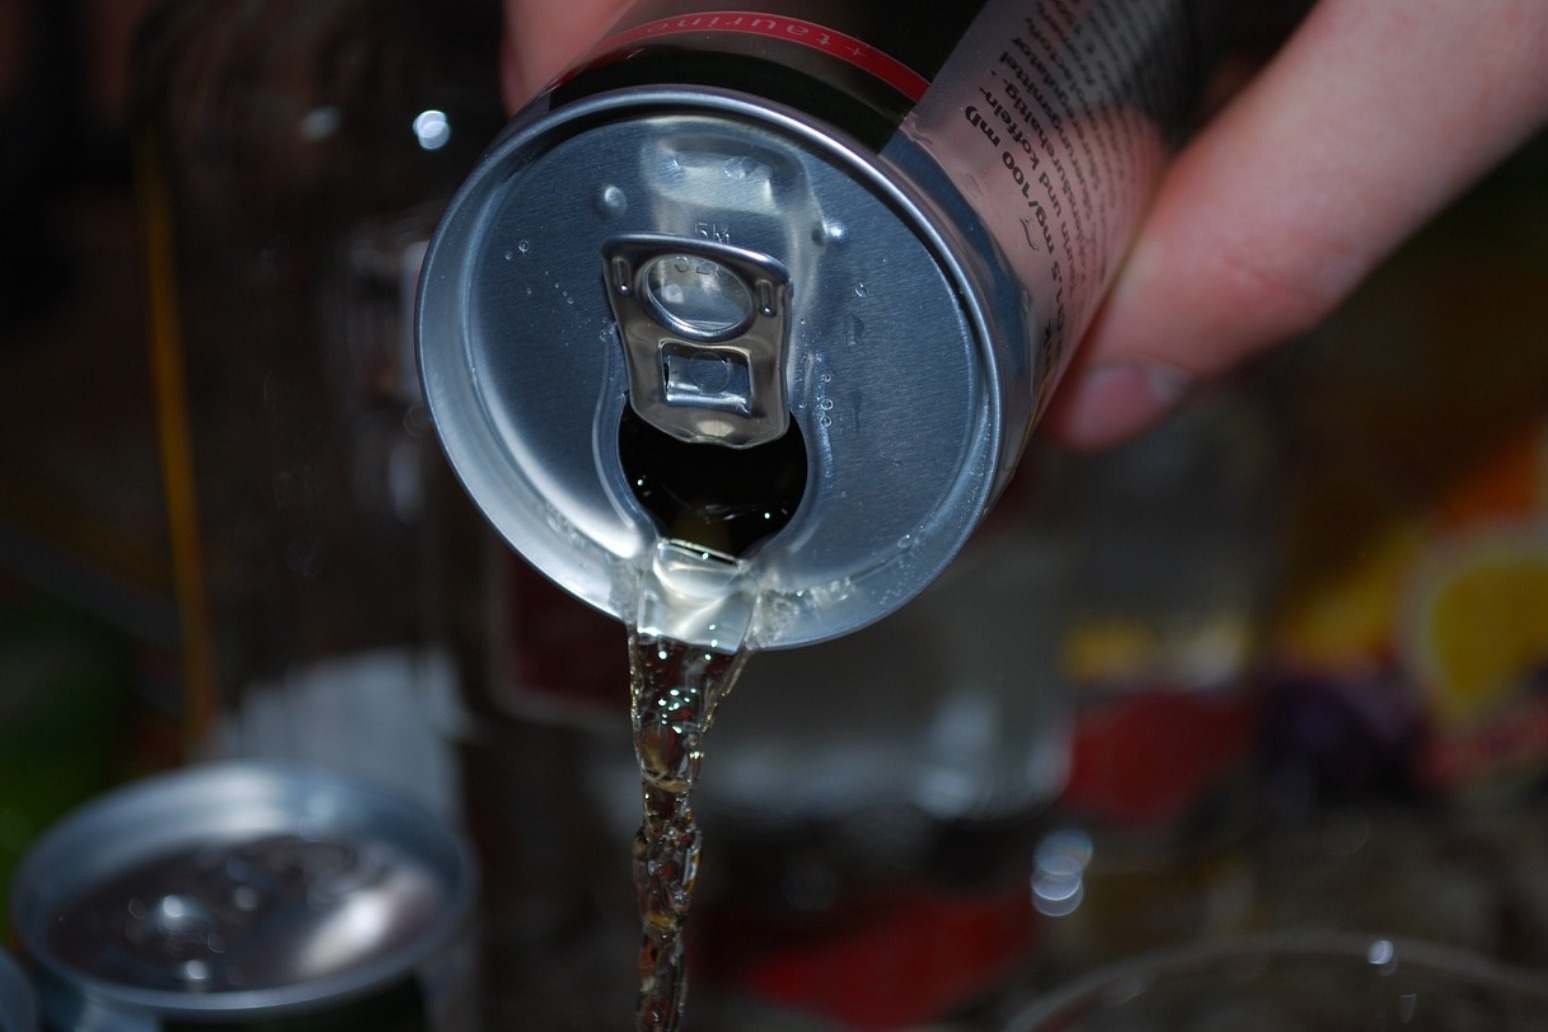 Government plans banning the sale of energy drinks to children 